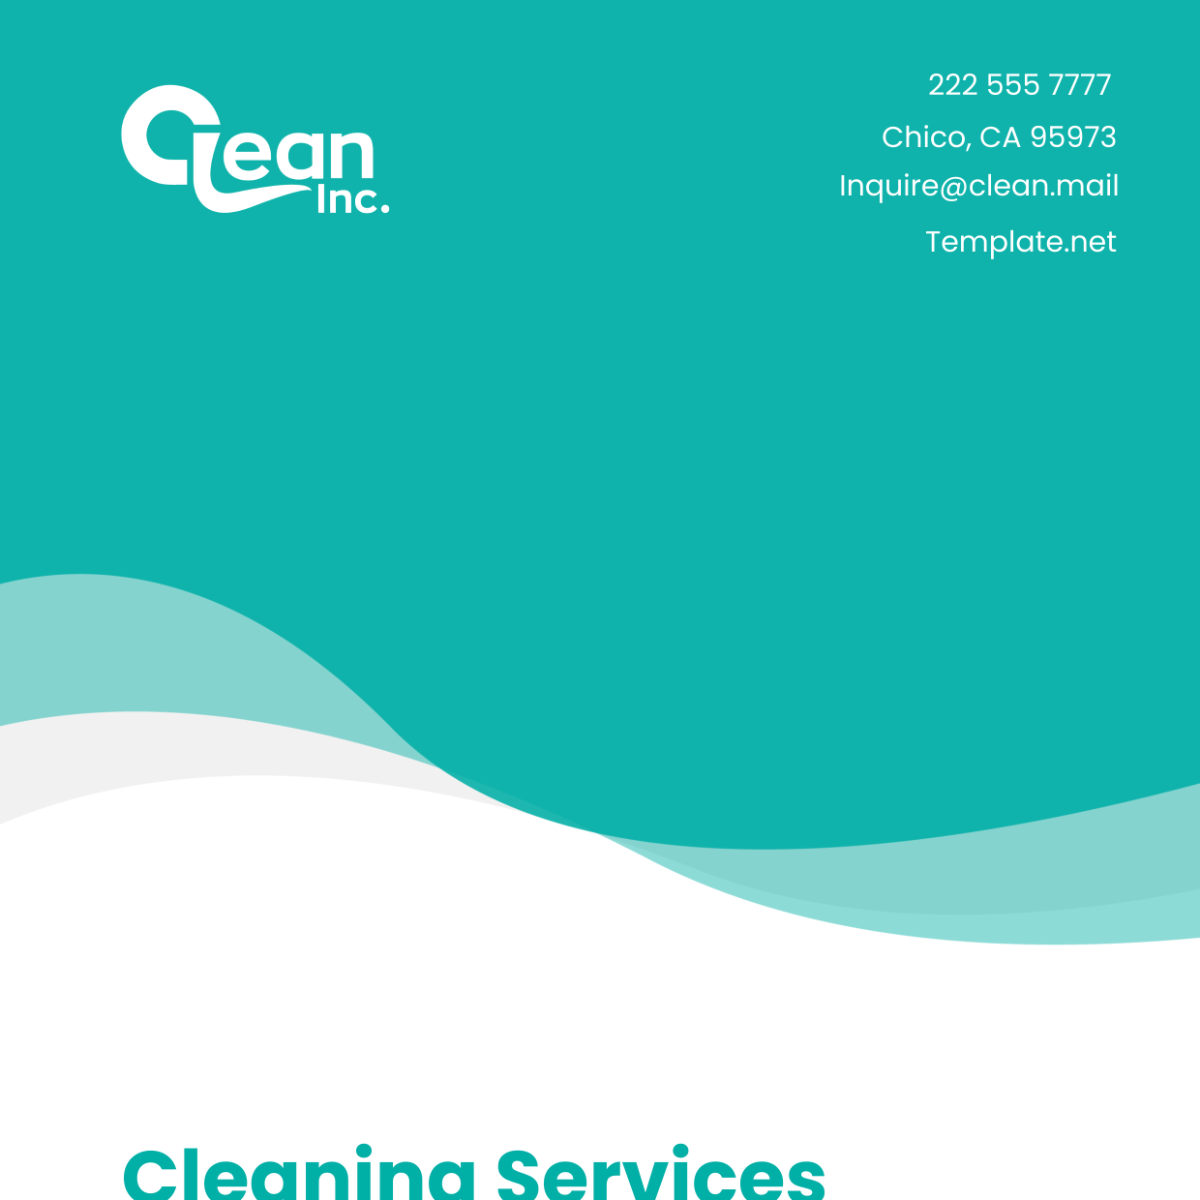 Cleaning Services Training & Development Guide Template